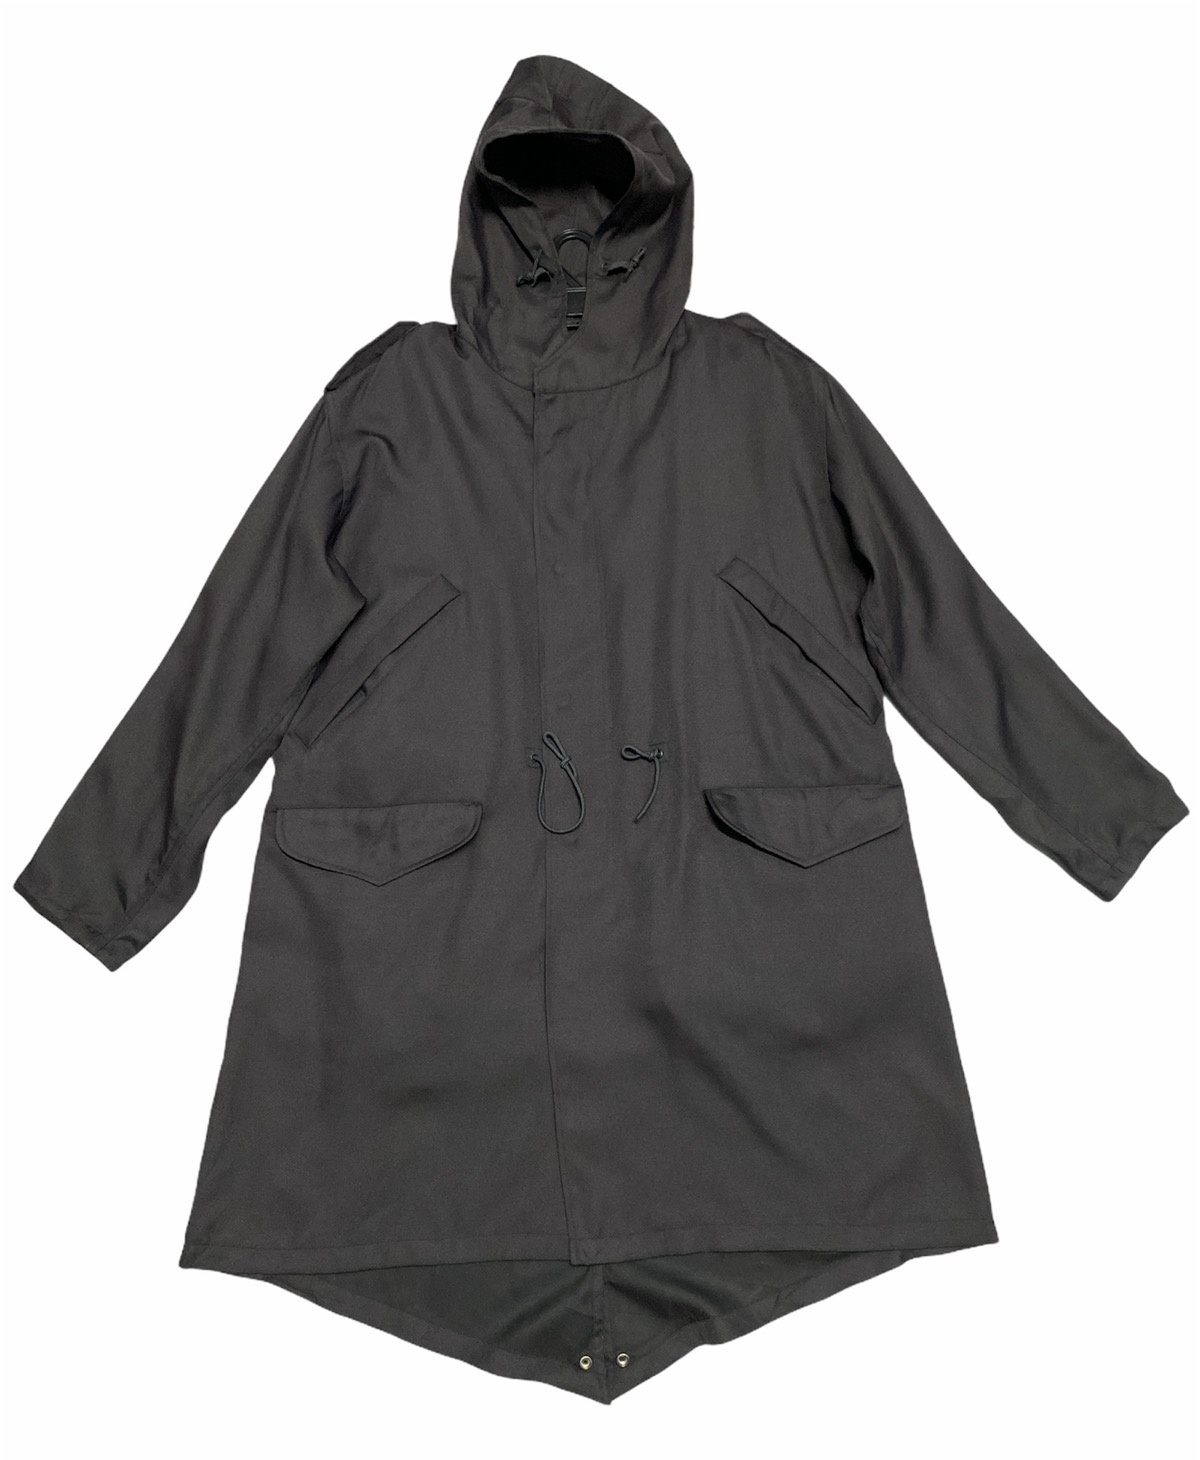 NWT !!!! DR.MARTENS TECHNICAL FISHTAIL PARKA HOODIE - 1